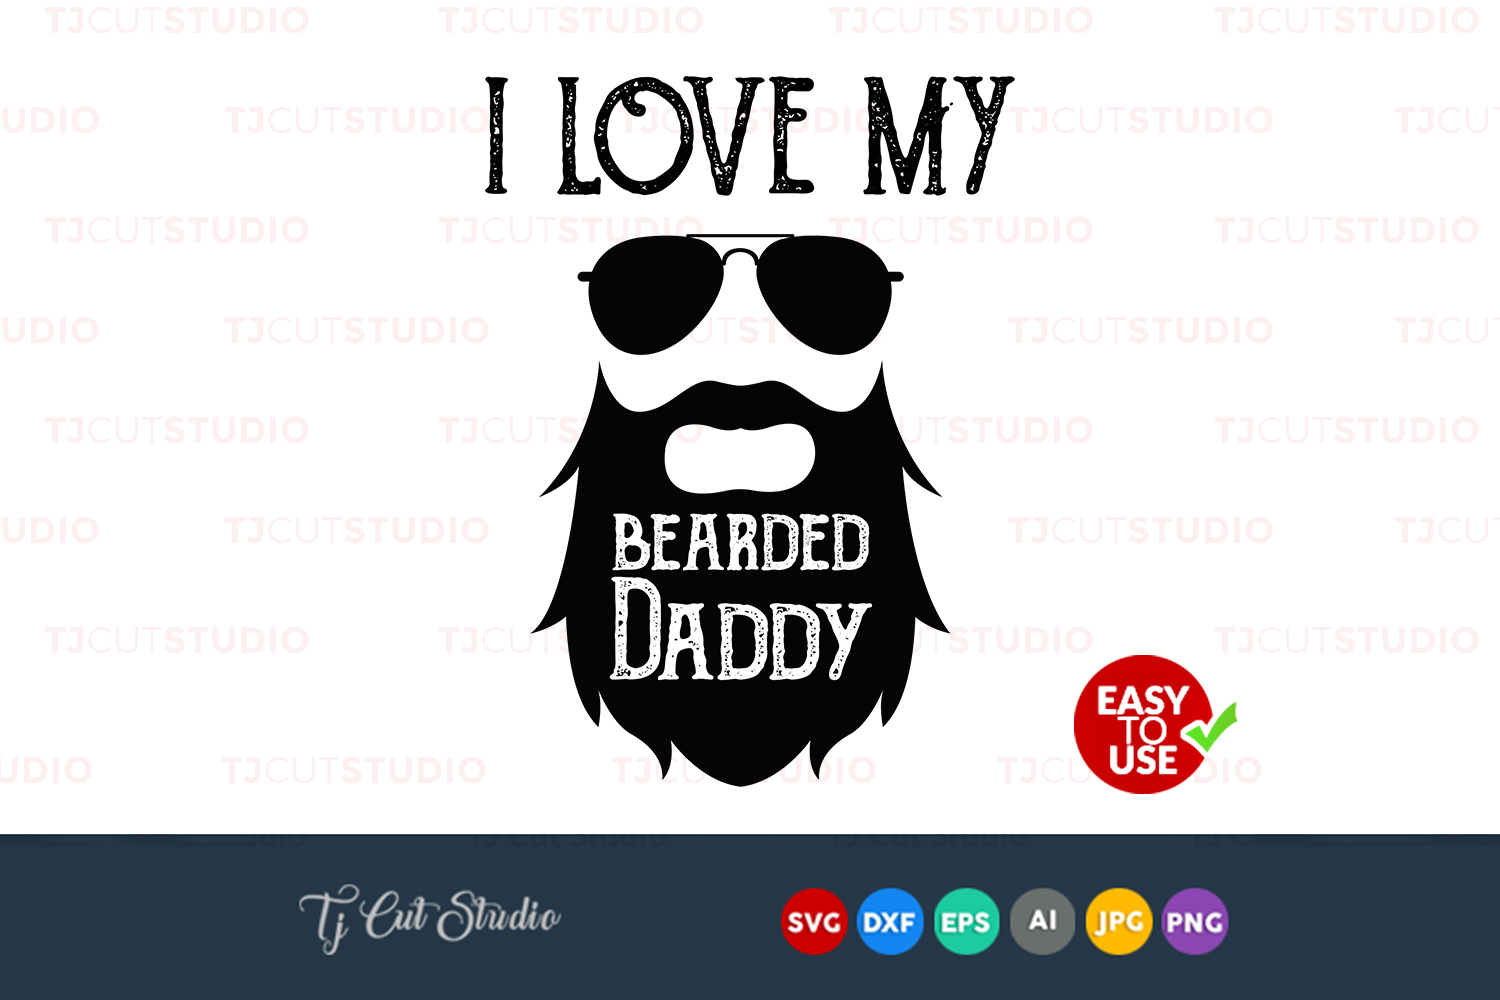 Download I love my bearded daddy, fathers day svg, quote svg, Files for Silhouette Cameo or Cricut ...